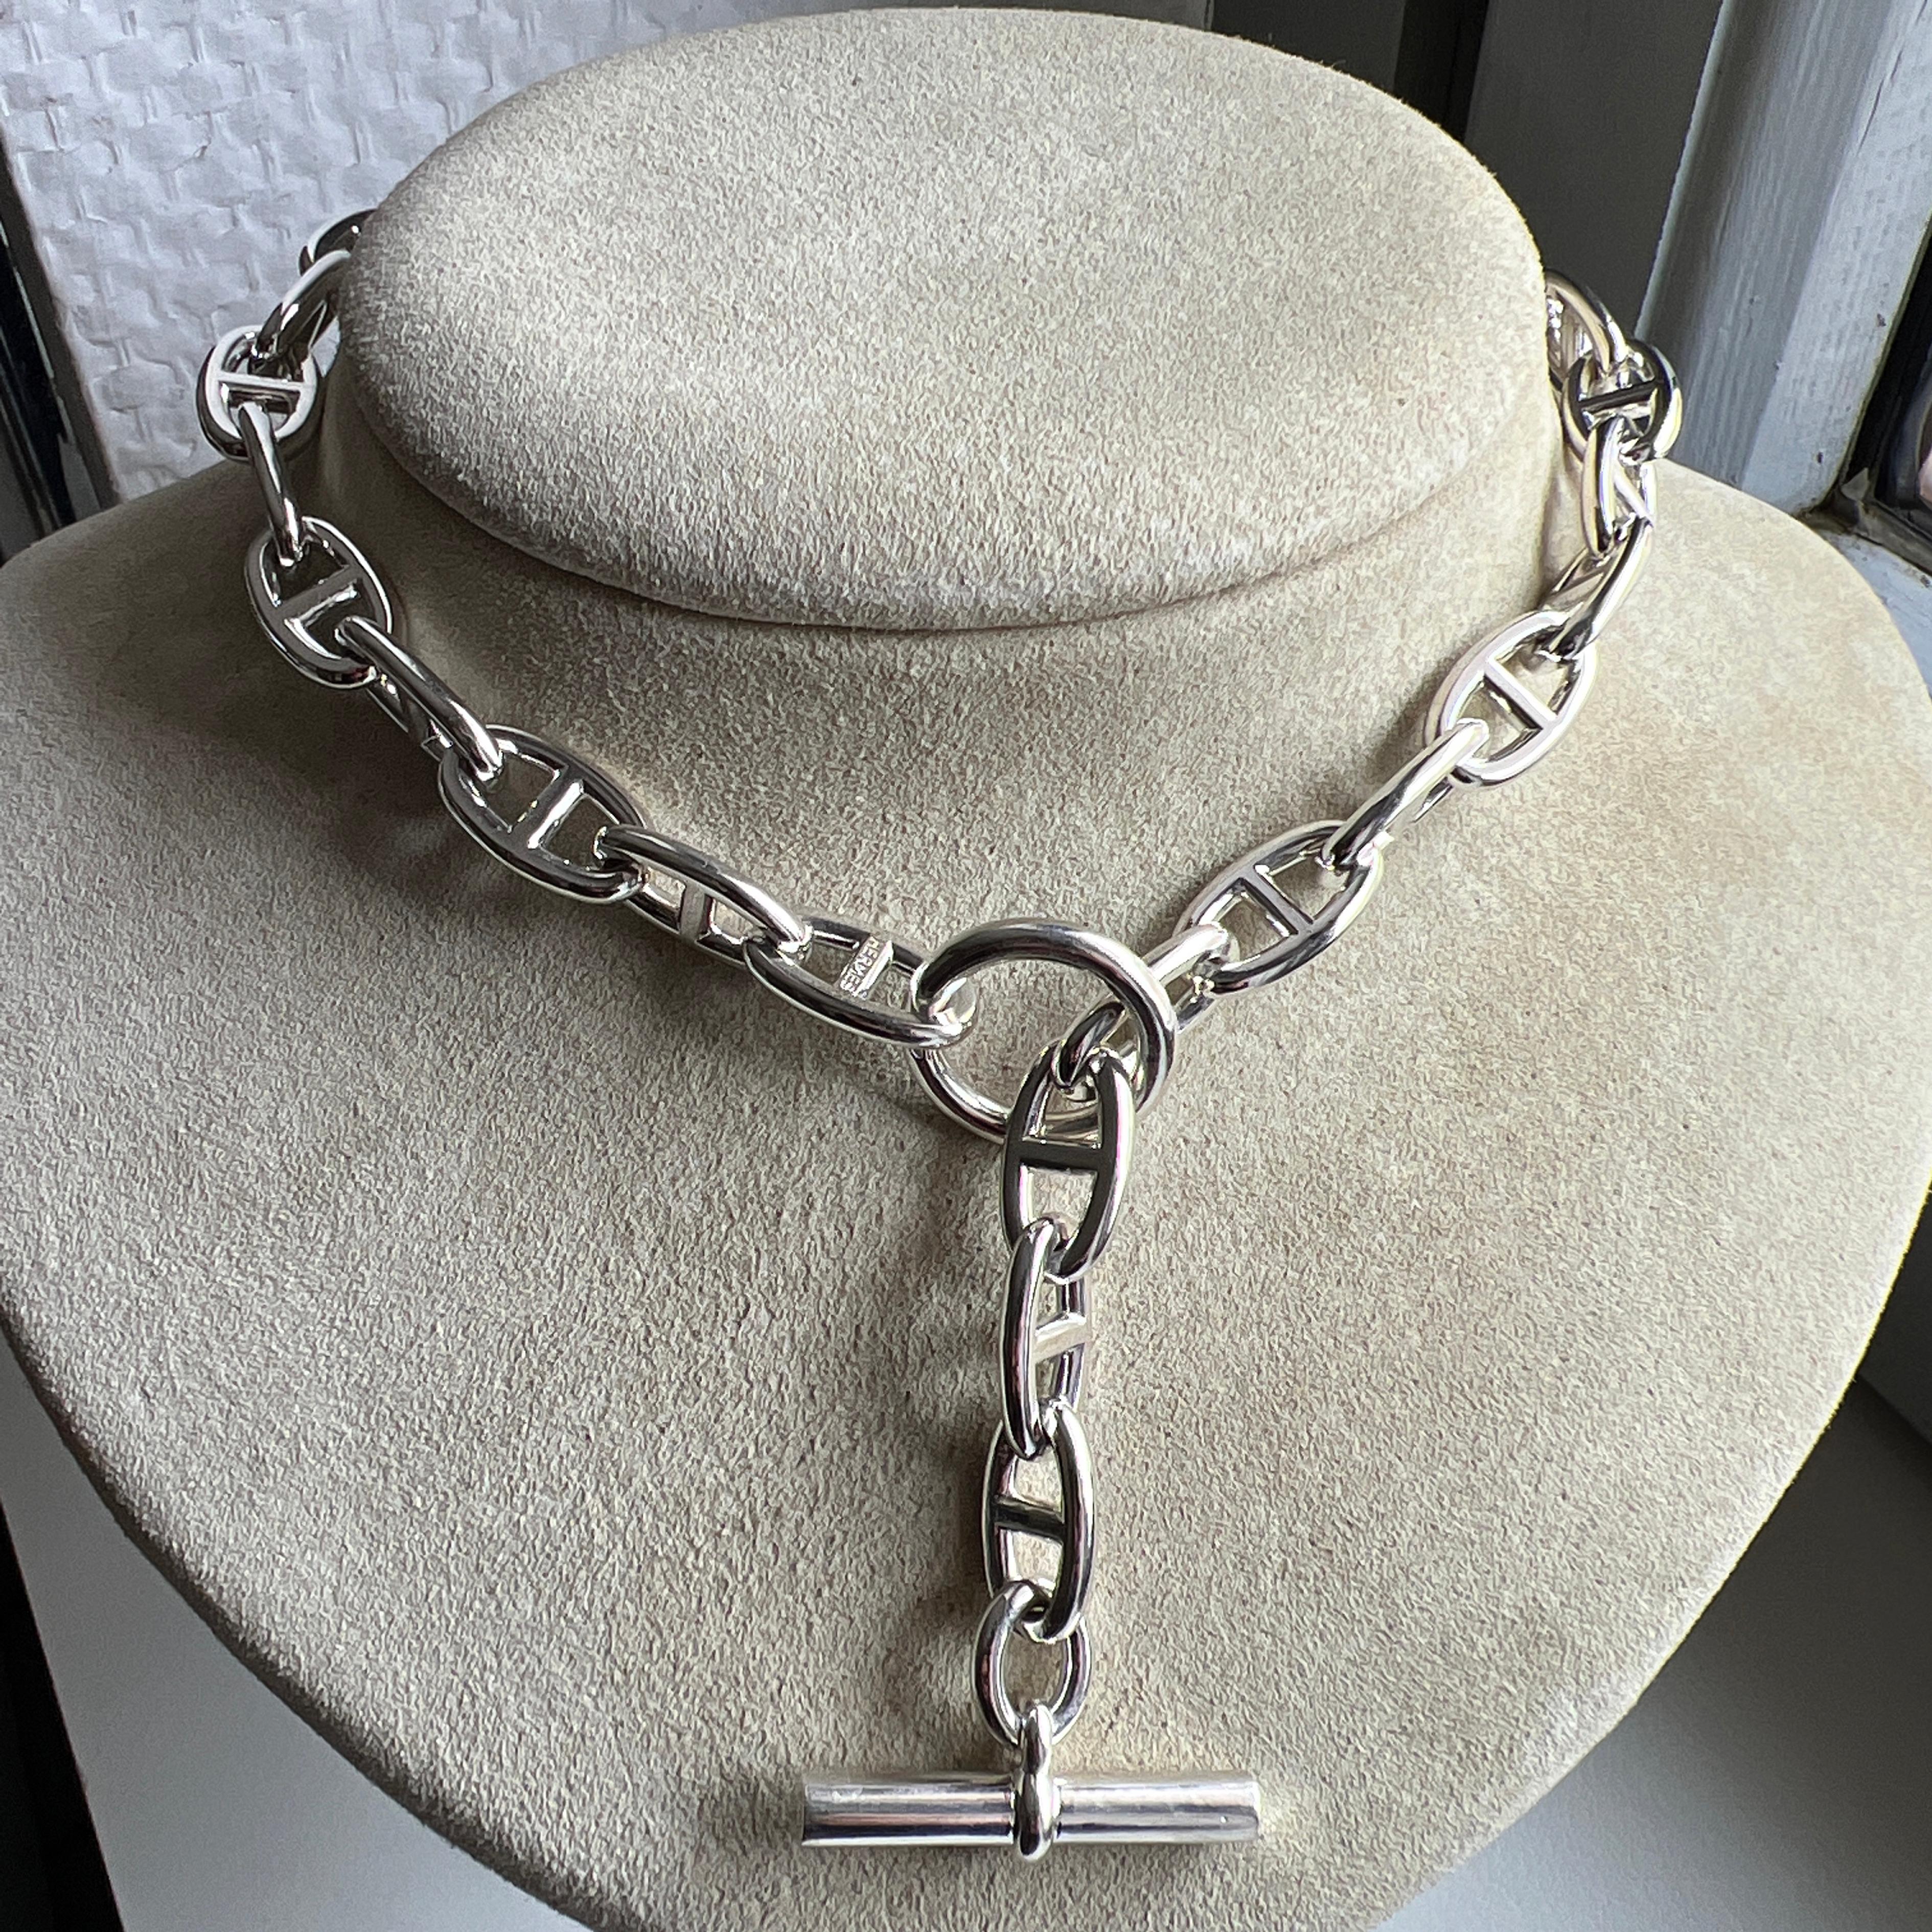 Hermès Chaine D'ancre Sterling Silver Necklace, circa 1995 3